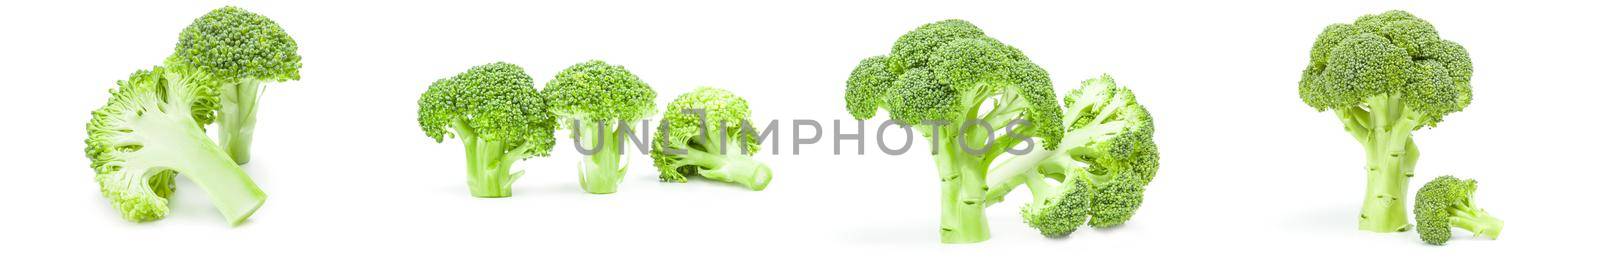 Group of fresh raw broccoli isolated on a white background cutout by Proff